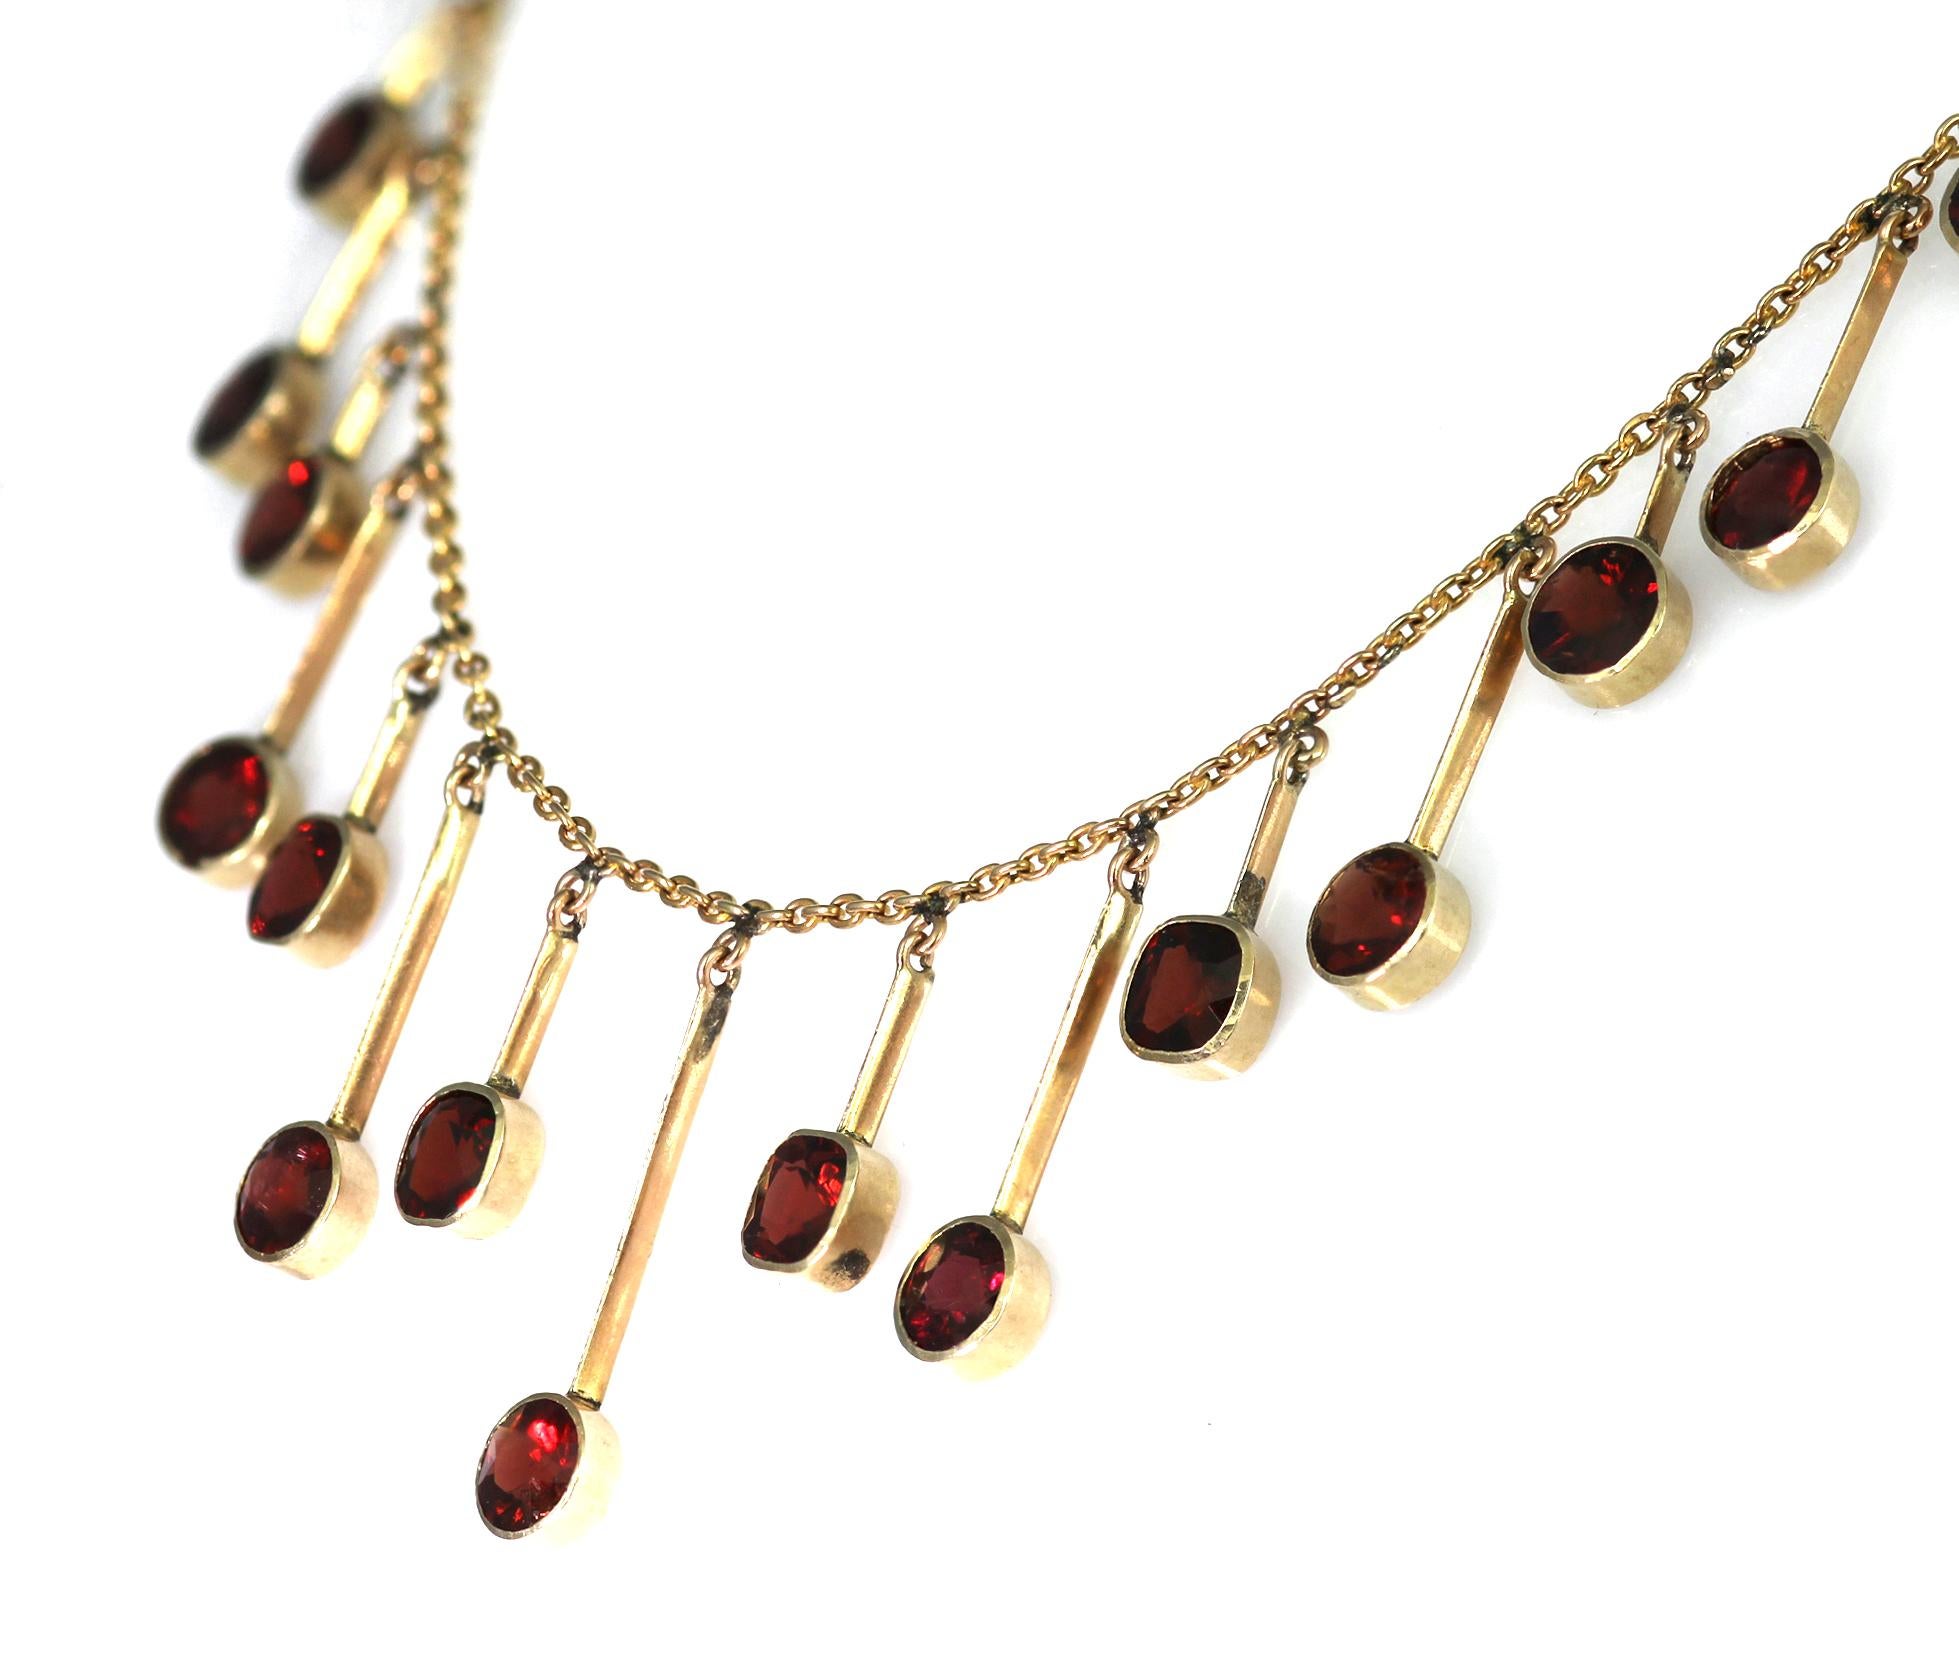 Antique timeless classic necklace, a Late 19th century 9 carat yellow gold and garnet fringe necklace. The necklace itself consists of a yellow gold chain with metal bars dangling off the chain each with a stunning garnet attached to it. The clasp